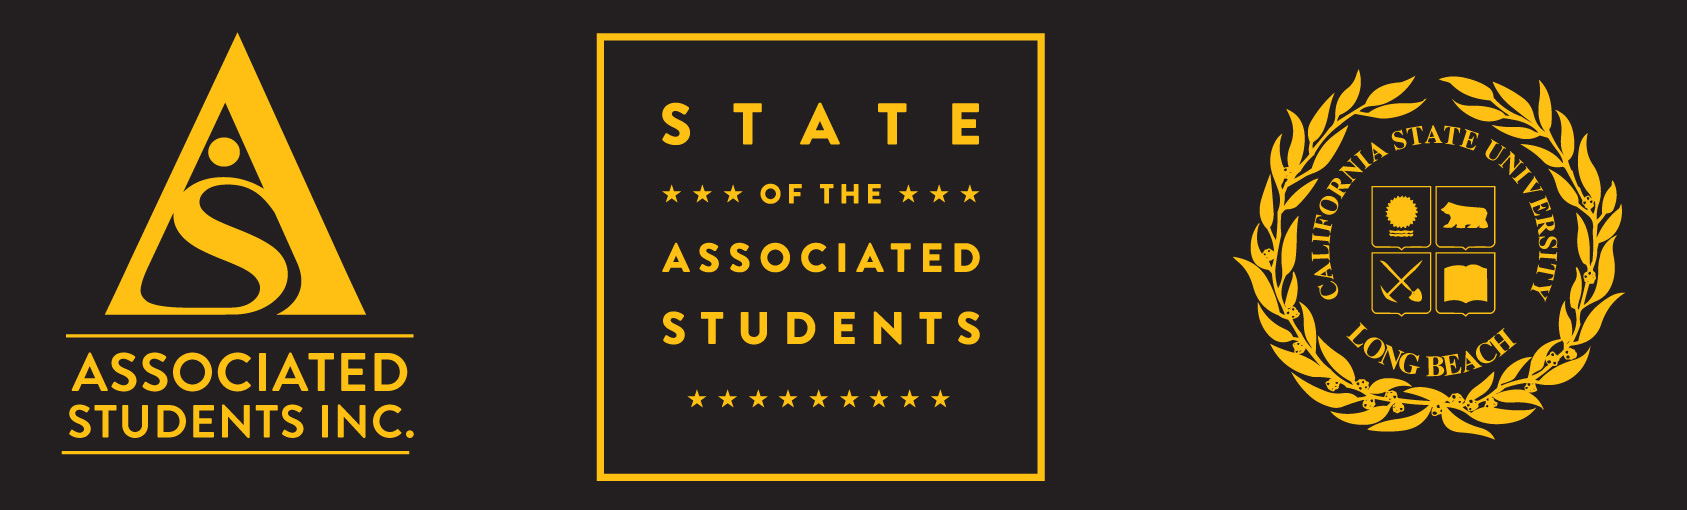 President Salazar’s State of the A.S. Banner